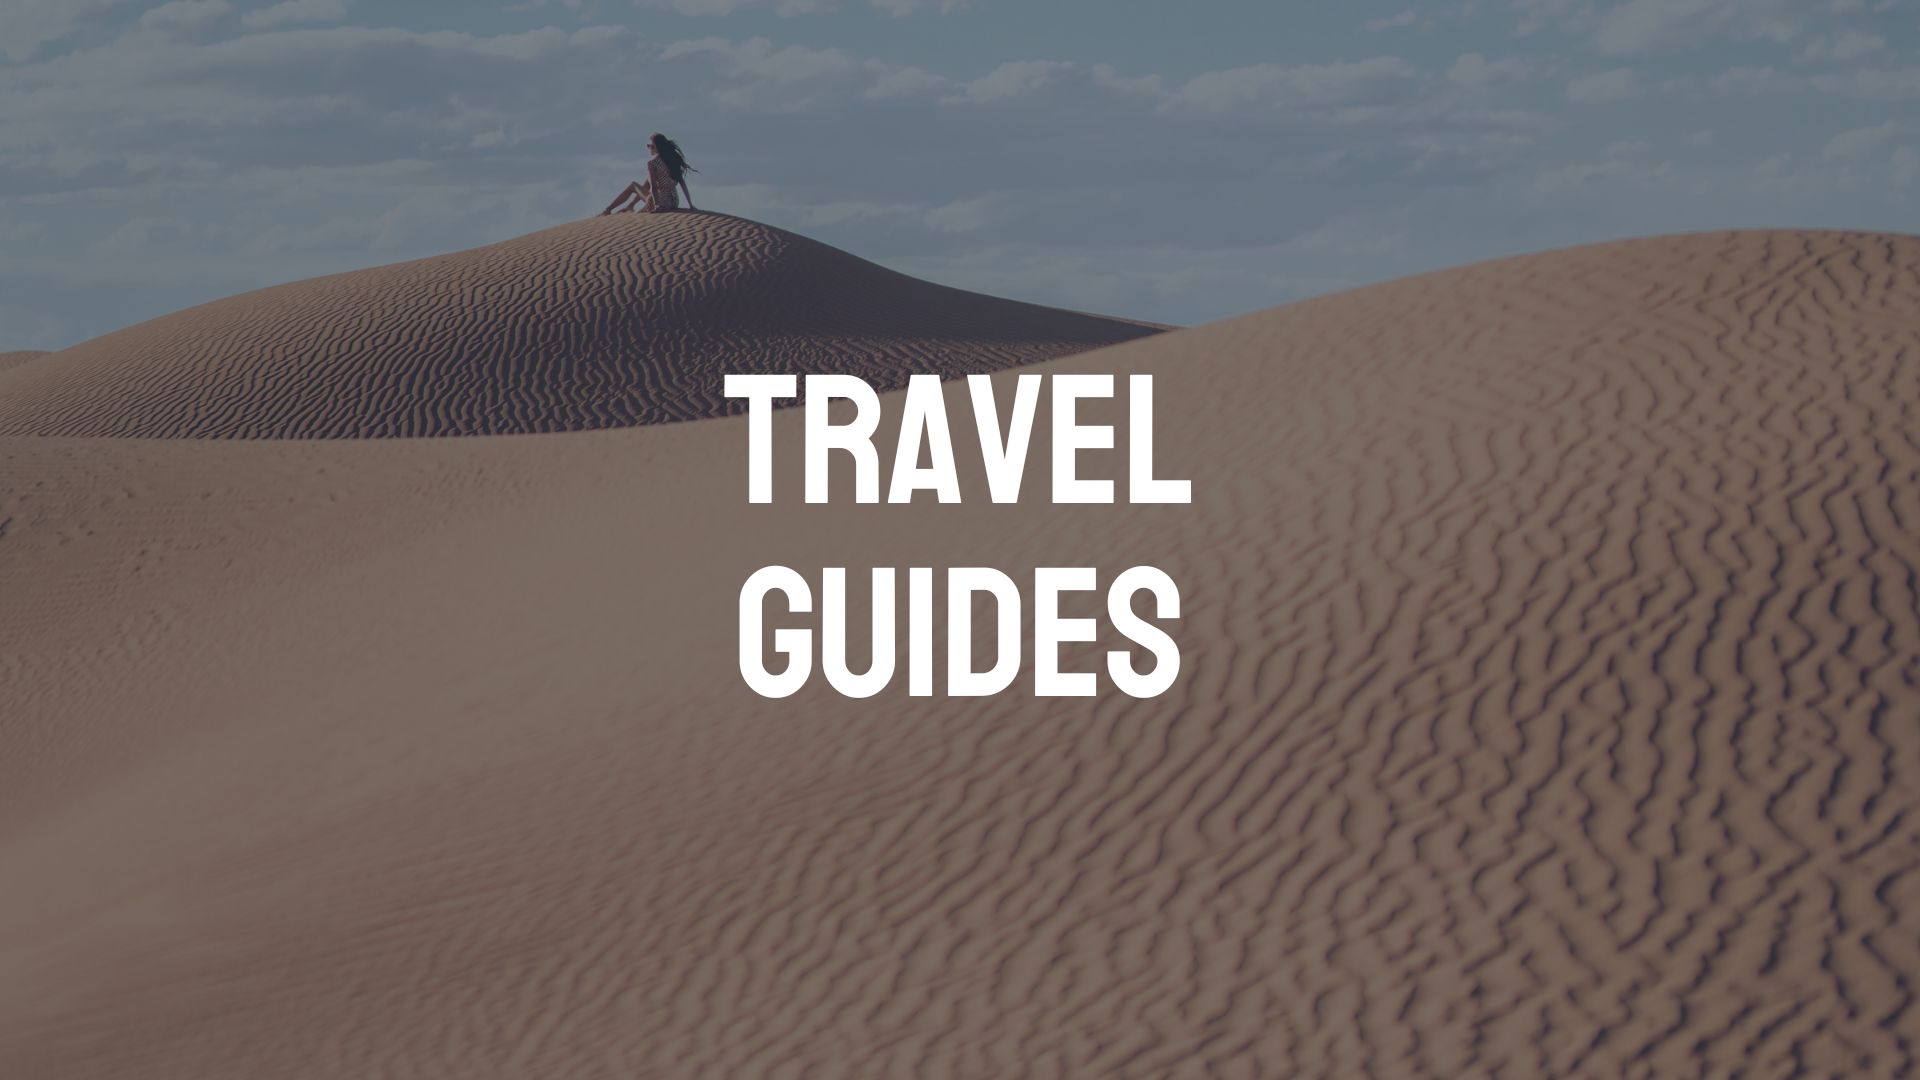 Plan Your Travel Guides